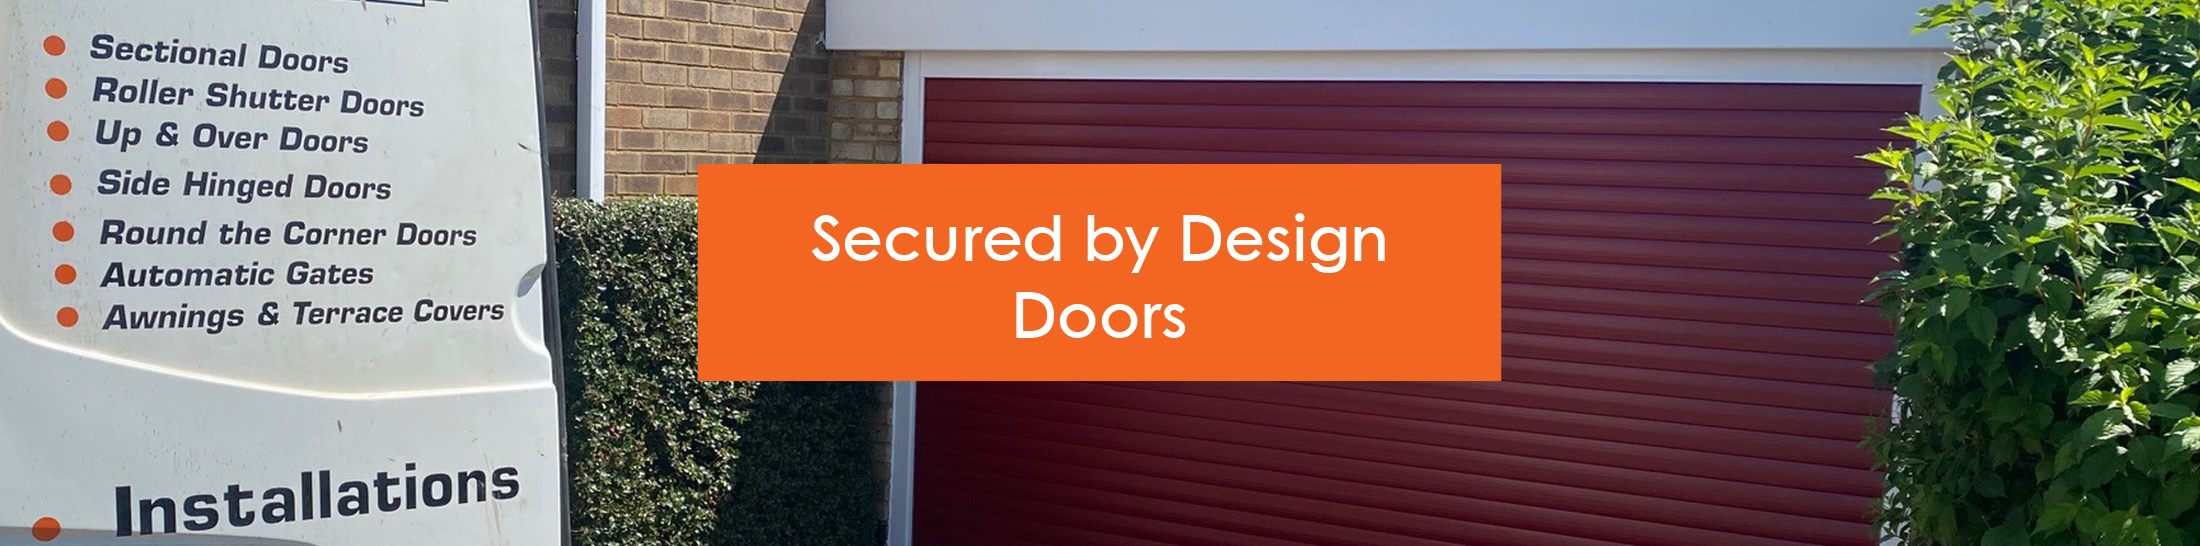 Secured by Design Garage Doors available from The Garage Door Centre